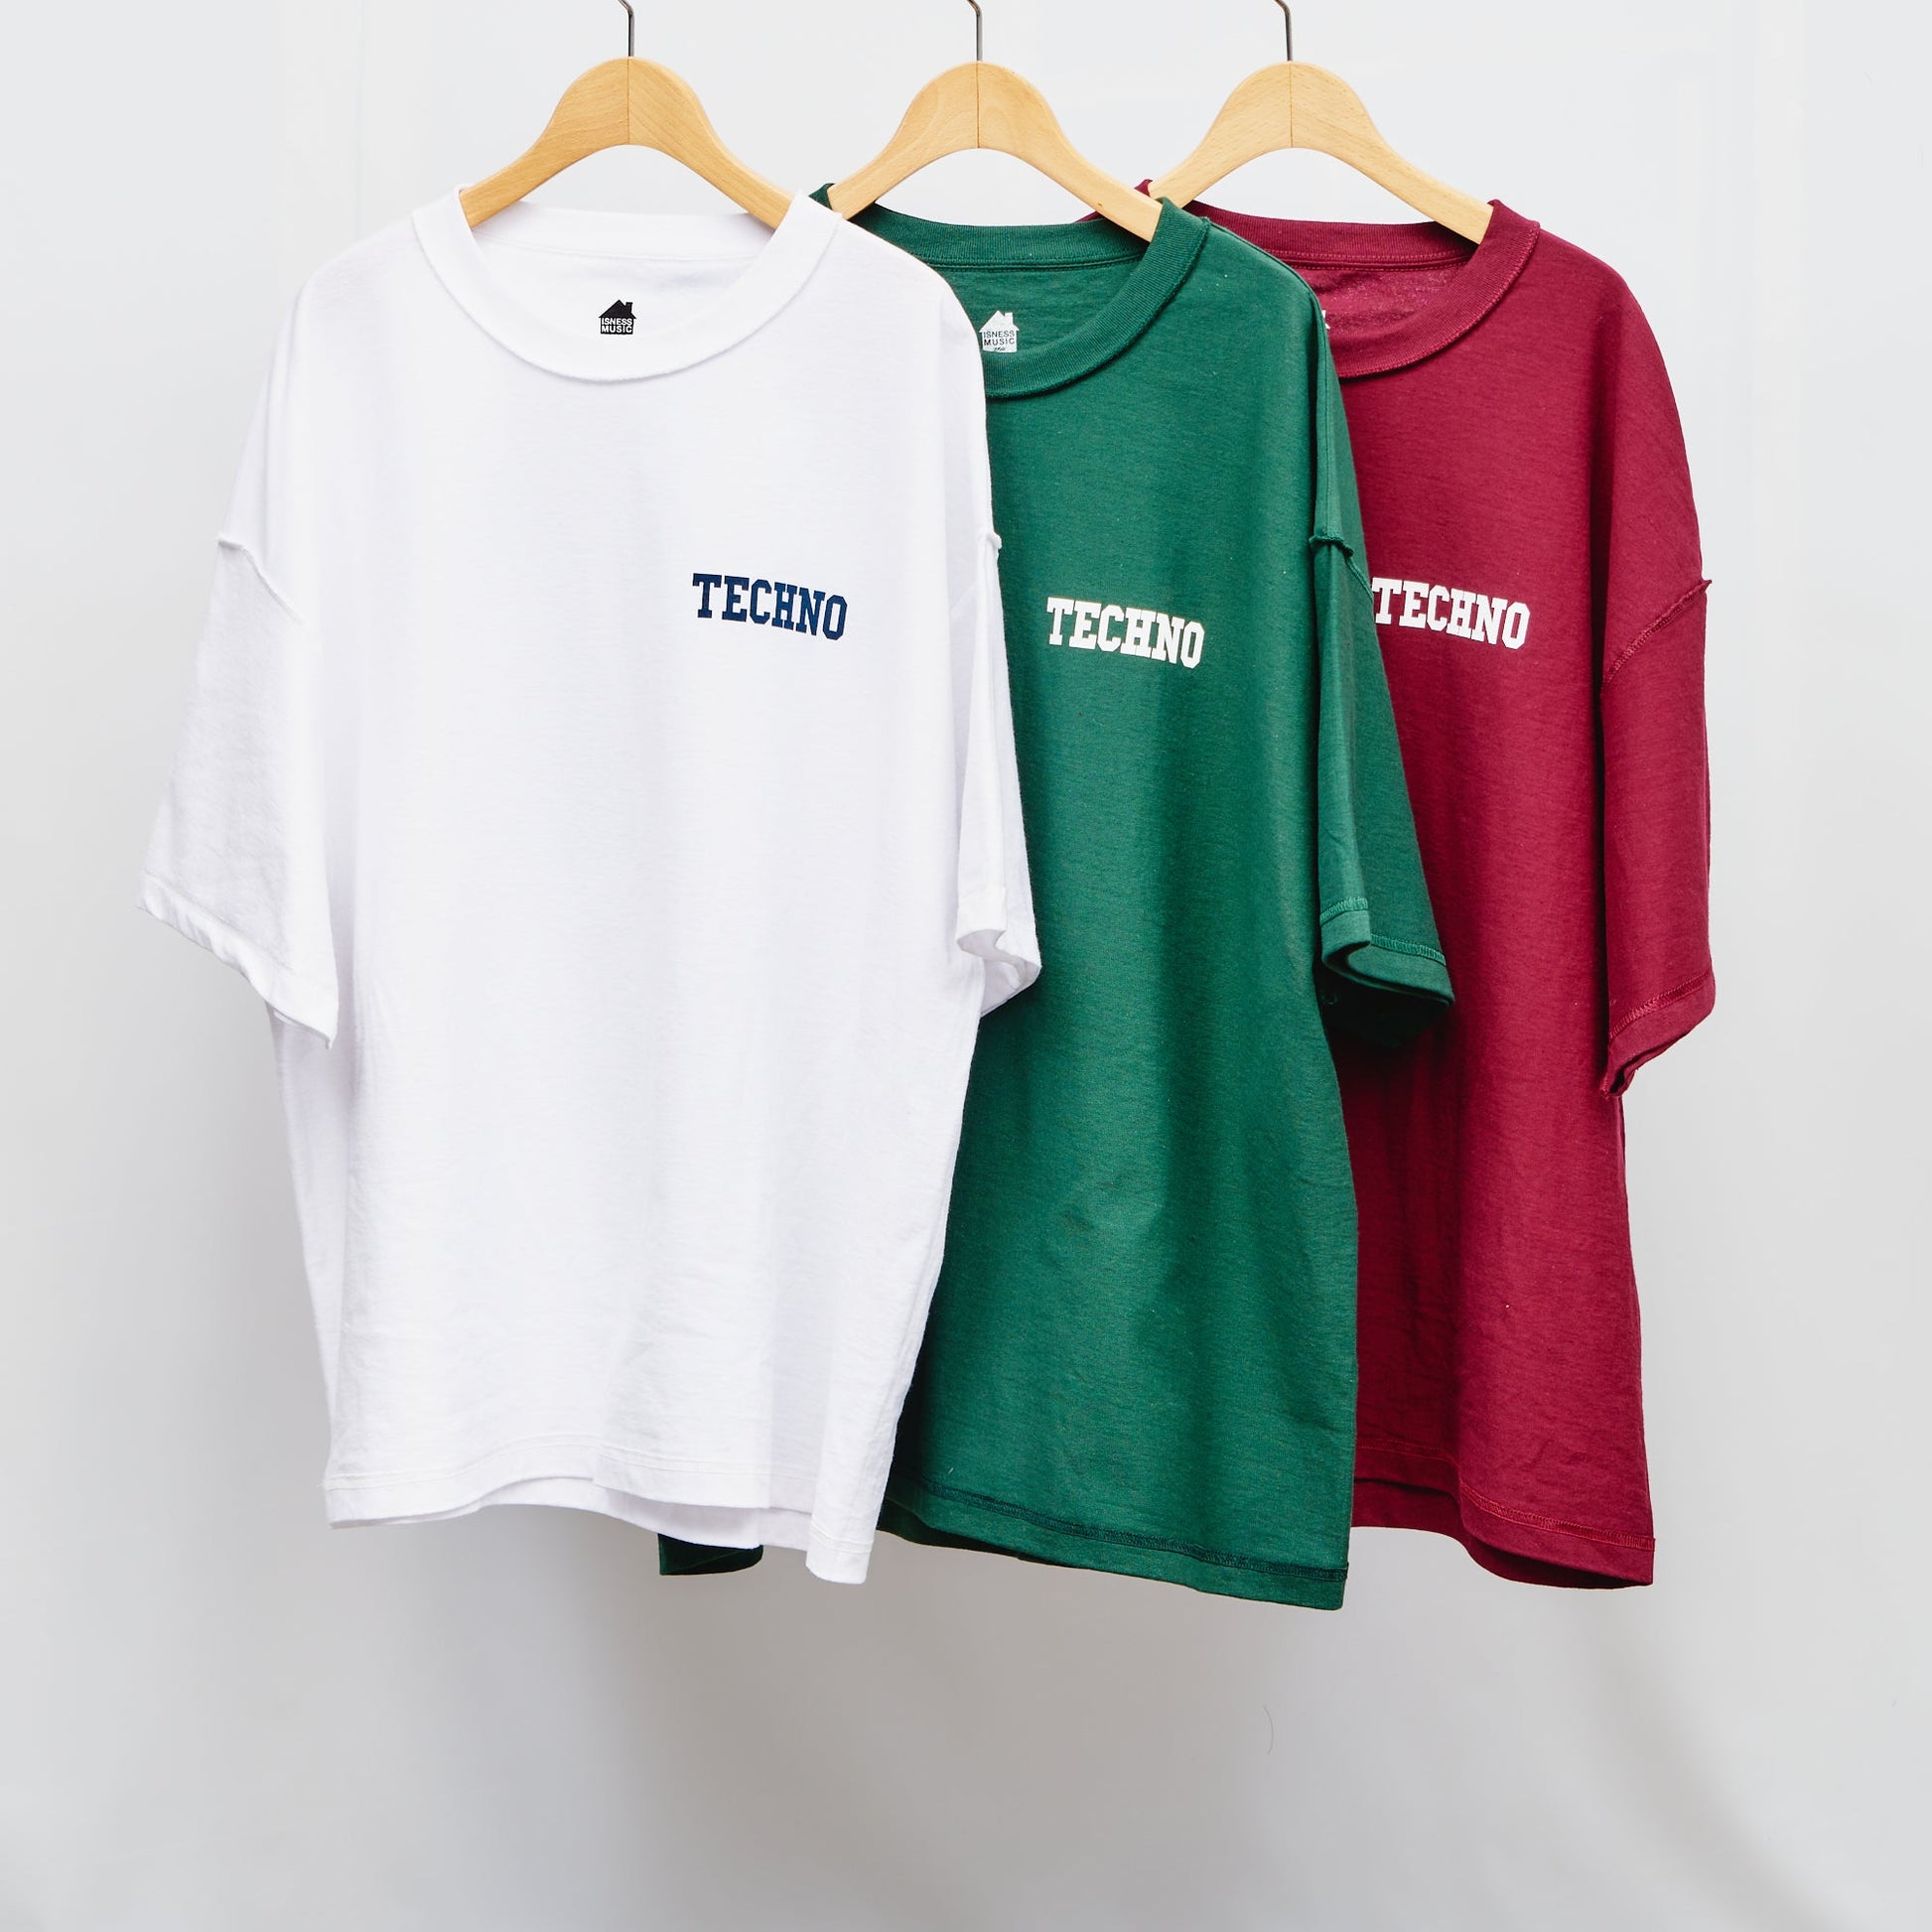 TECHNO S/S T-SHIRTS is-ness online shop 1